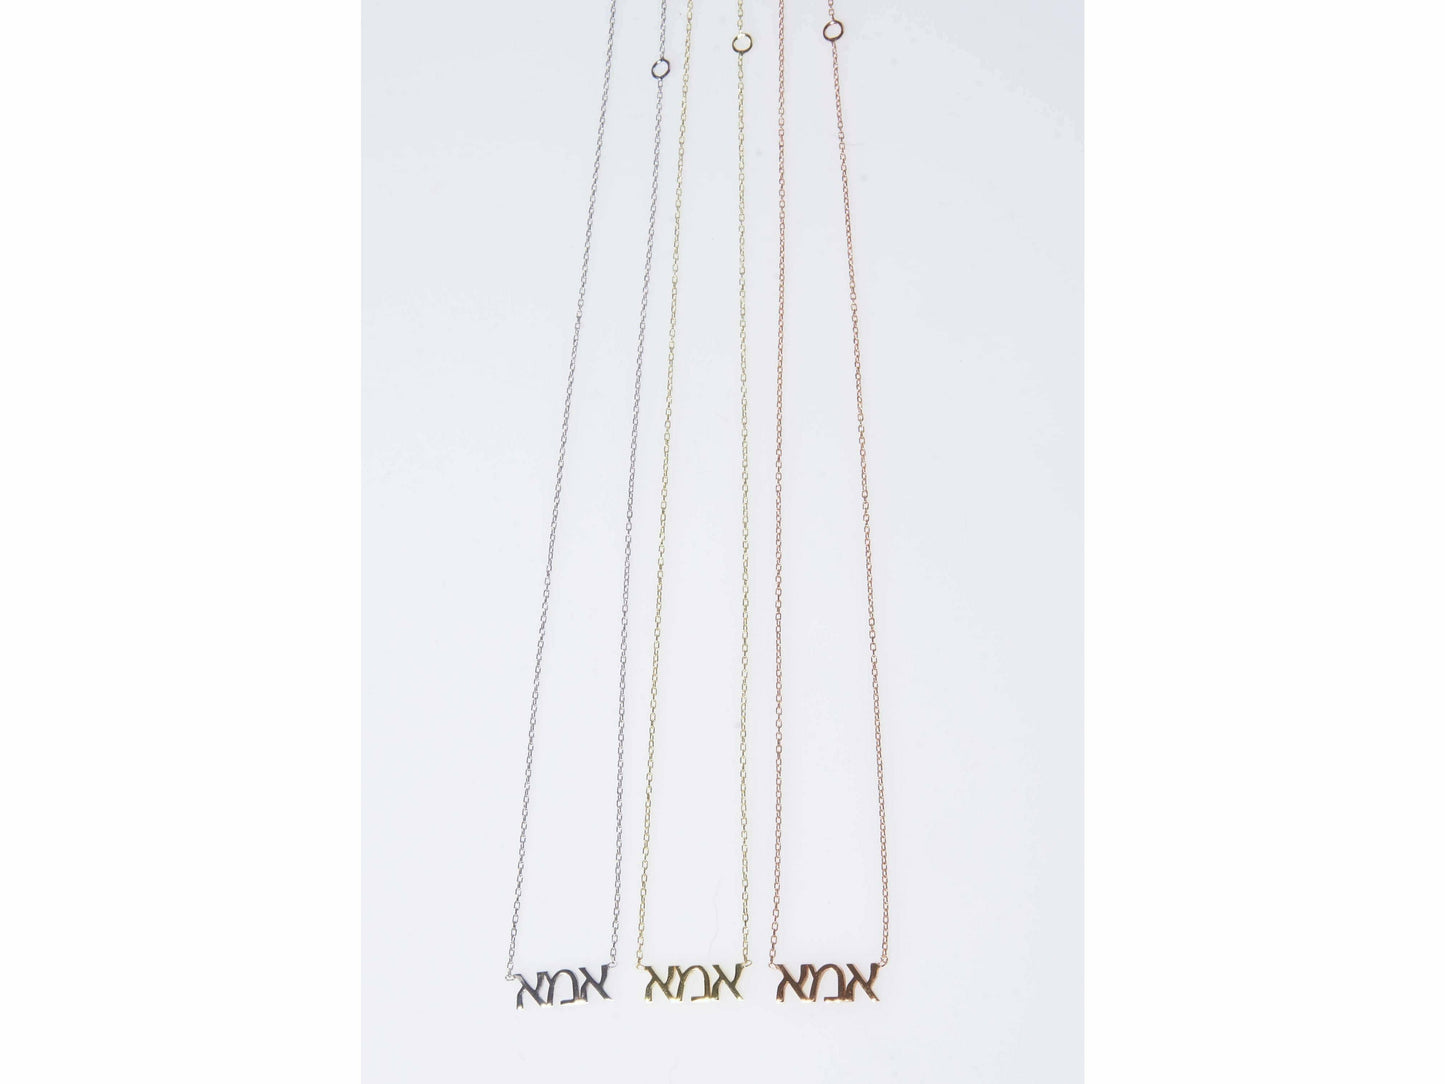 Imma (Mom in Hebrew) Necklace